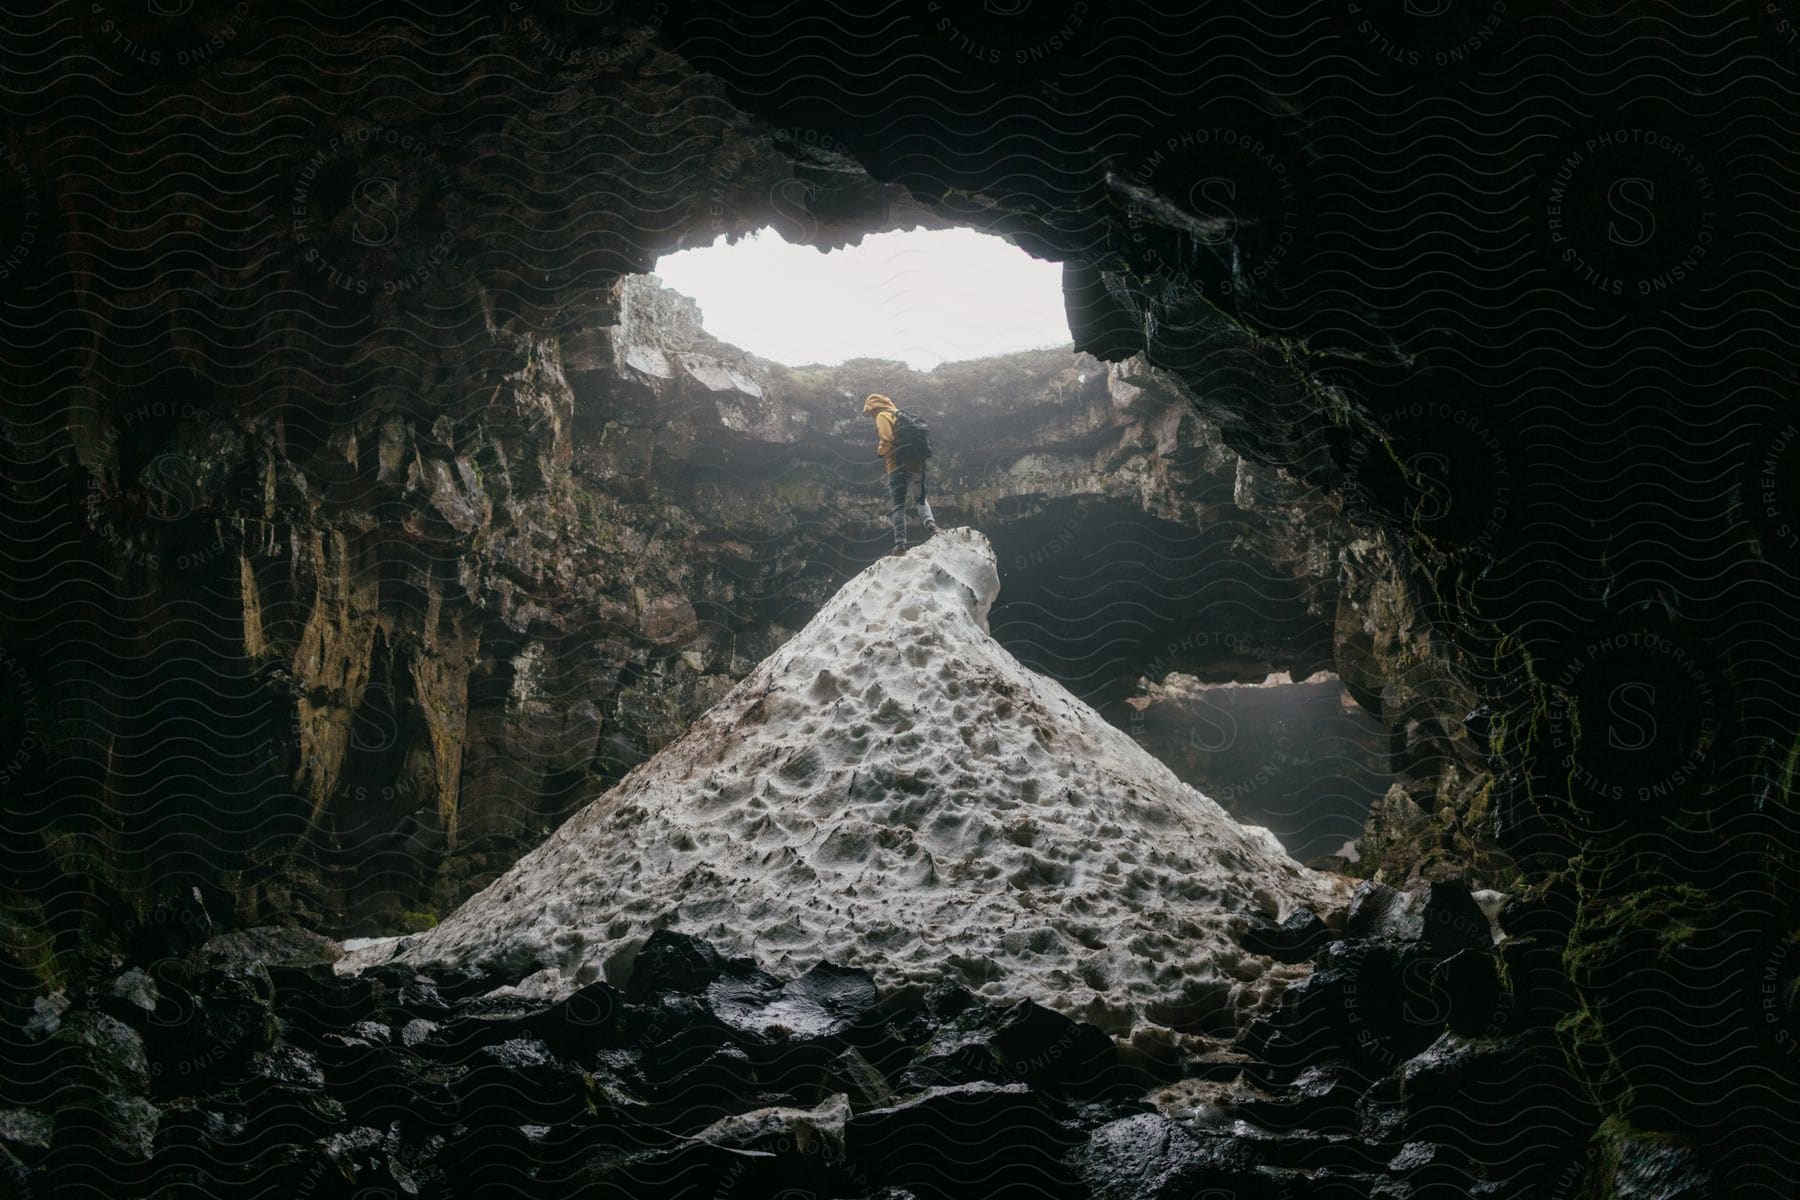 A hiker climbs on top of a melted snow mound in a cave on a sunny day in iceland